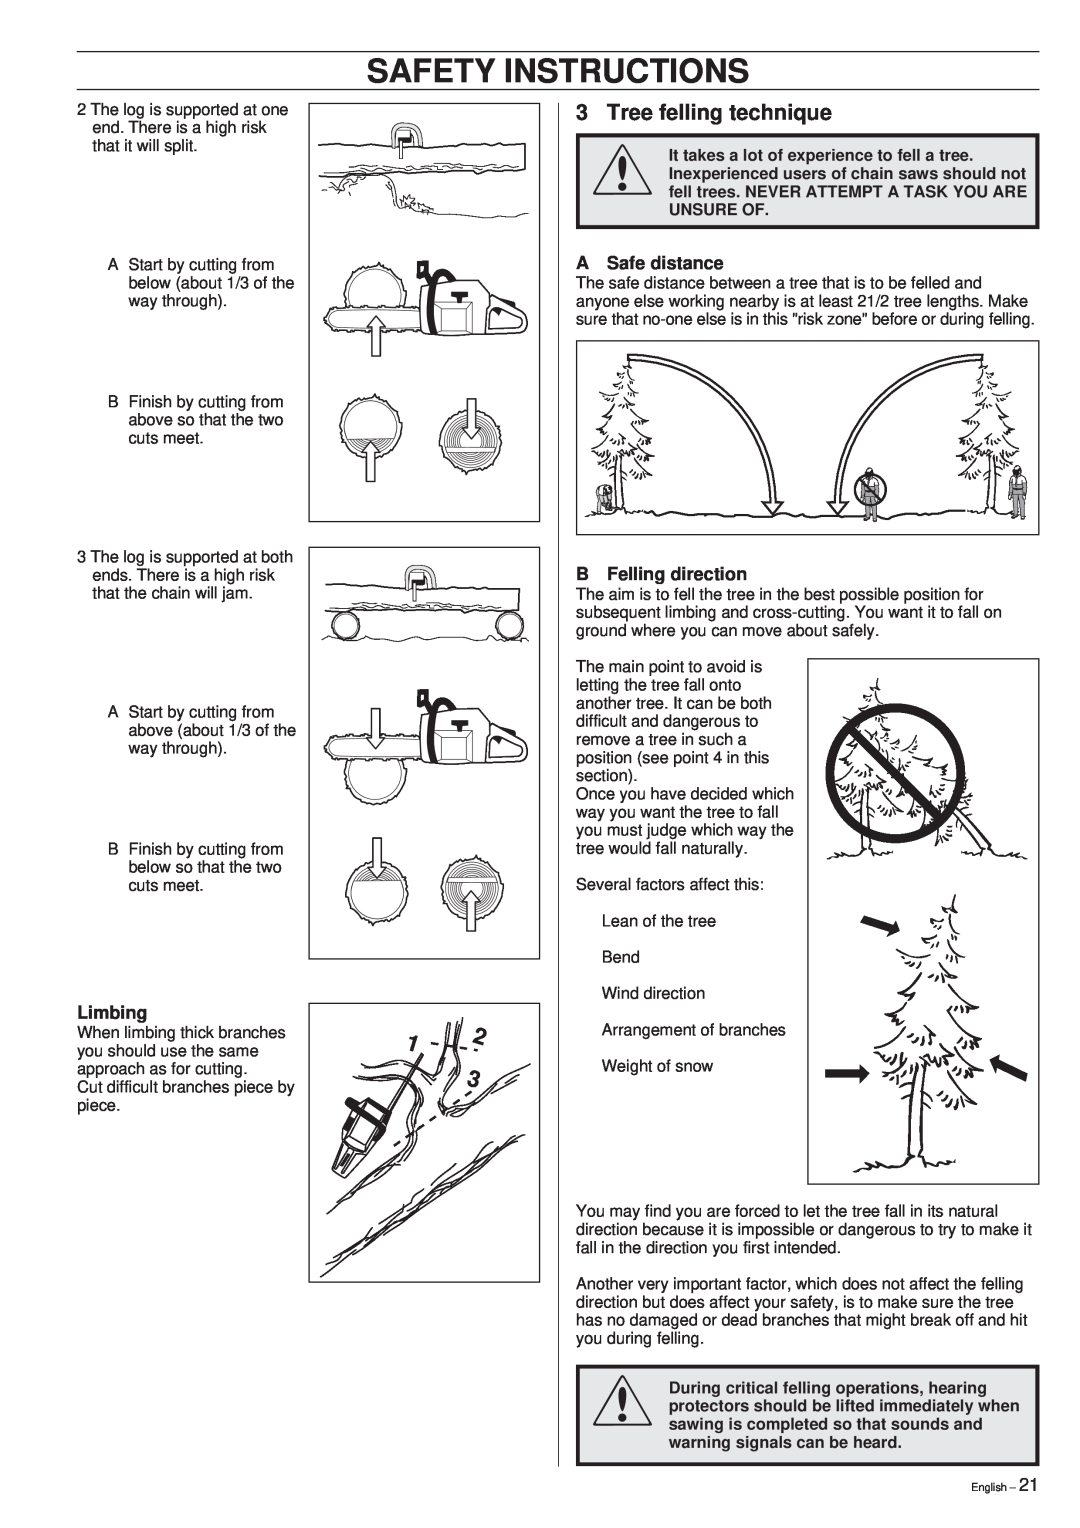 Husqvarna 281XP, 288XP manual Safety Instructions, Tree felling technique, A Safe distance, Limbing, B Felling direction 